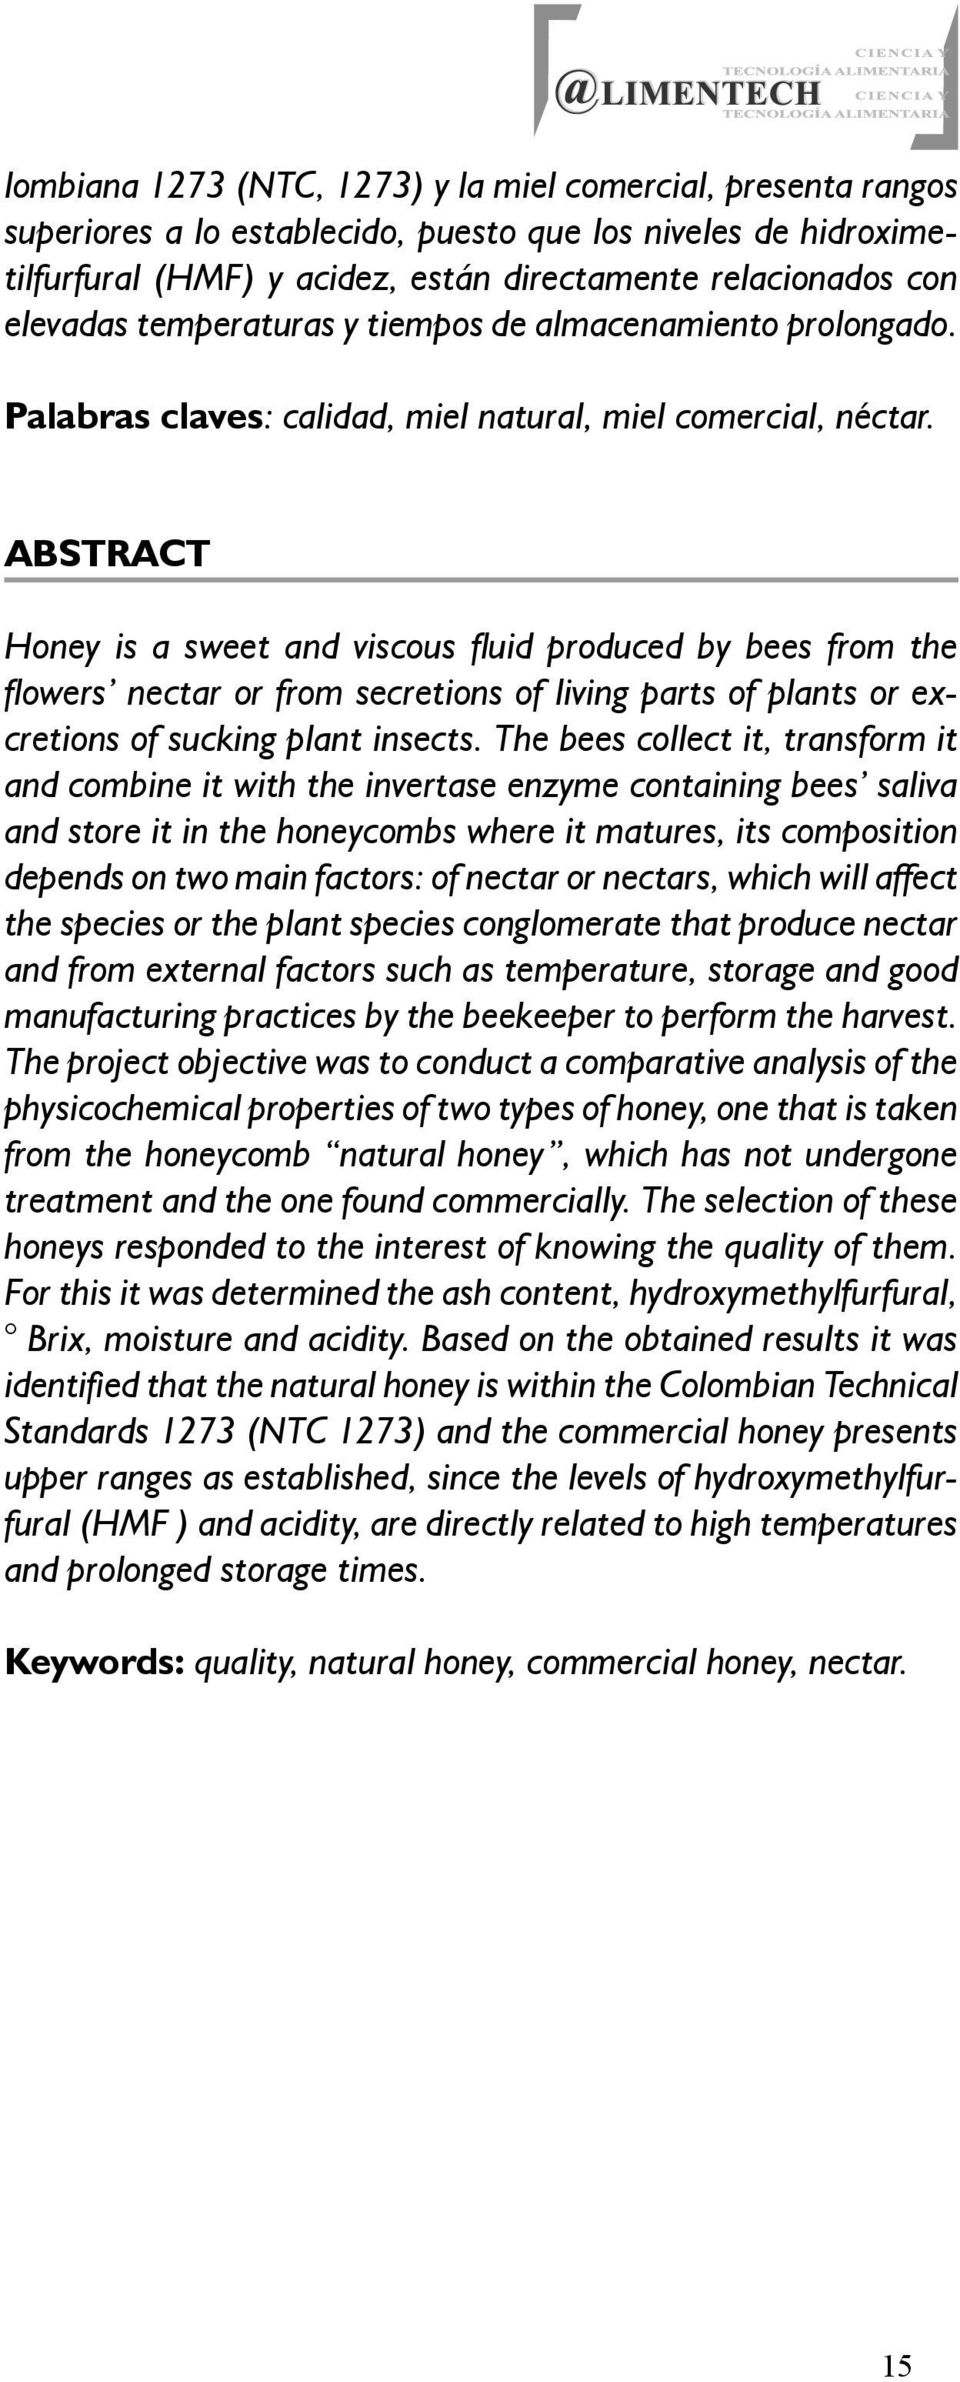 ABSTRACT Honey is a sweet and viscous fl uid produced by bees from the fl owers nectar or from secretions of living parts of plants or excretions of sucking plant insects.